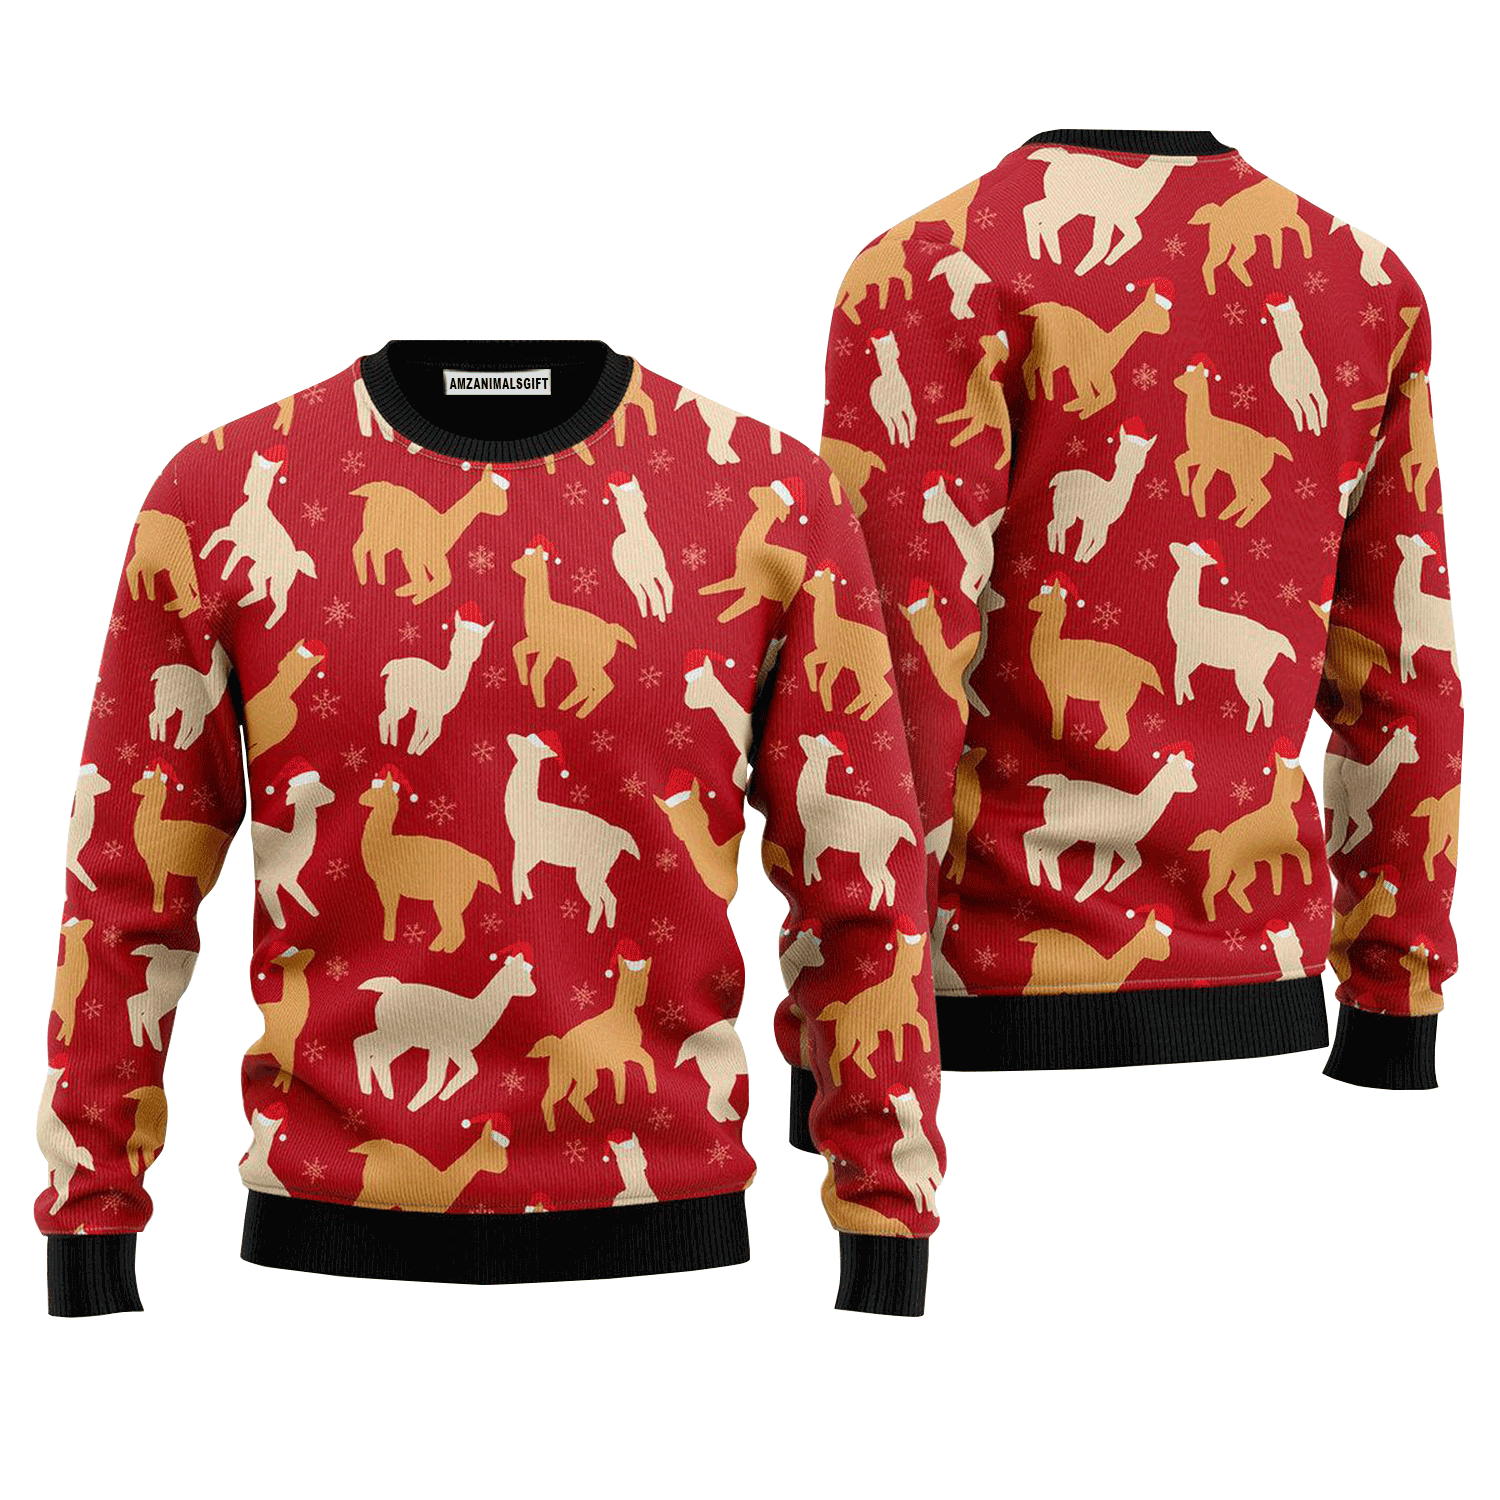 Awesome Llamas Red Sweater Christmas, Ugly Sweater For Men & Women, Perfect Outfit For Christmas New Year Autumn Winter